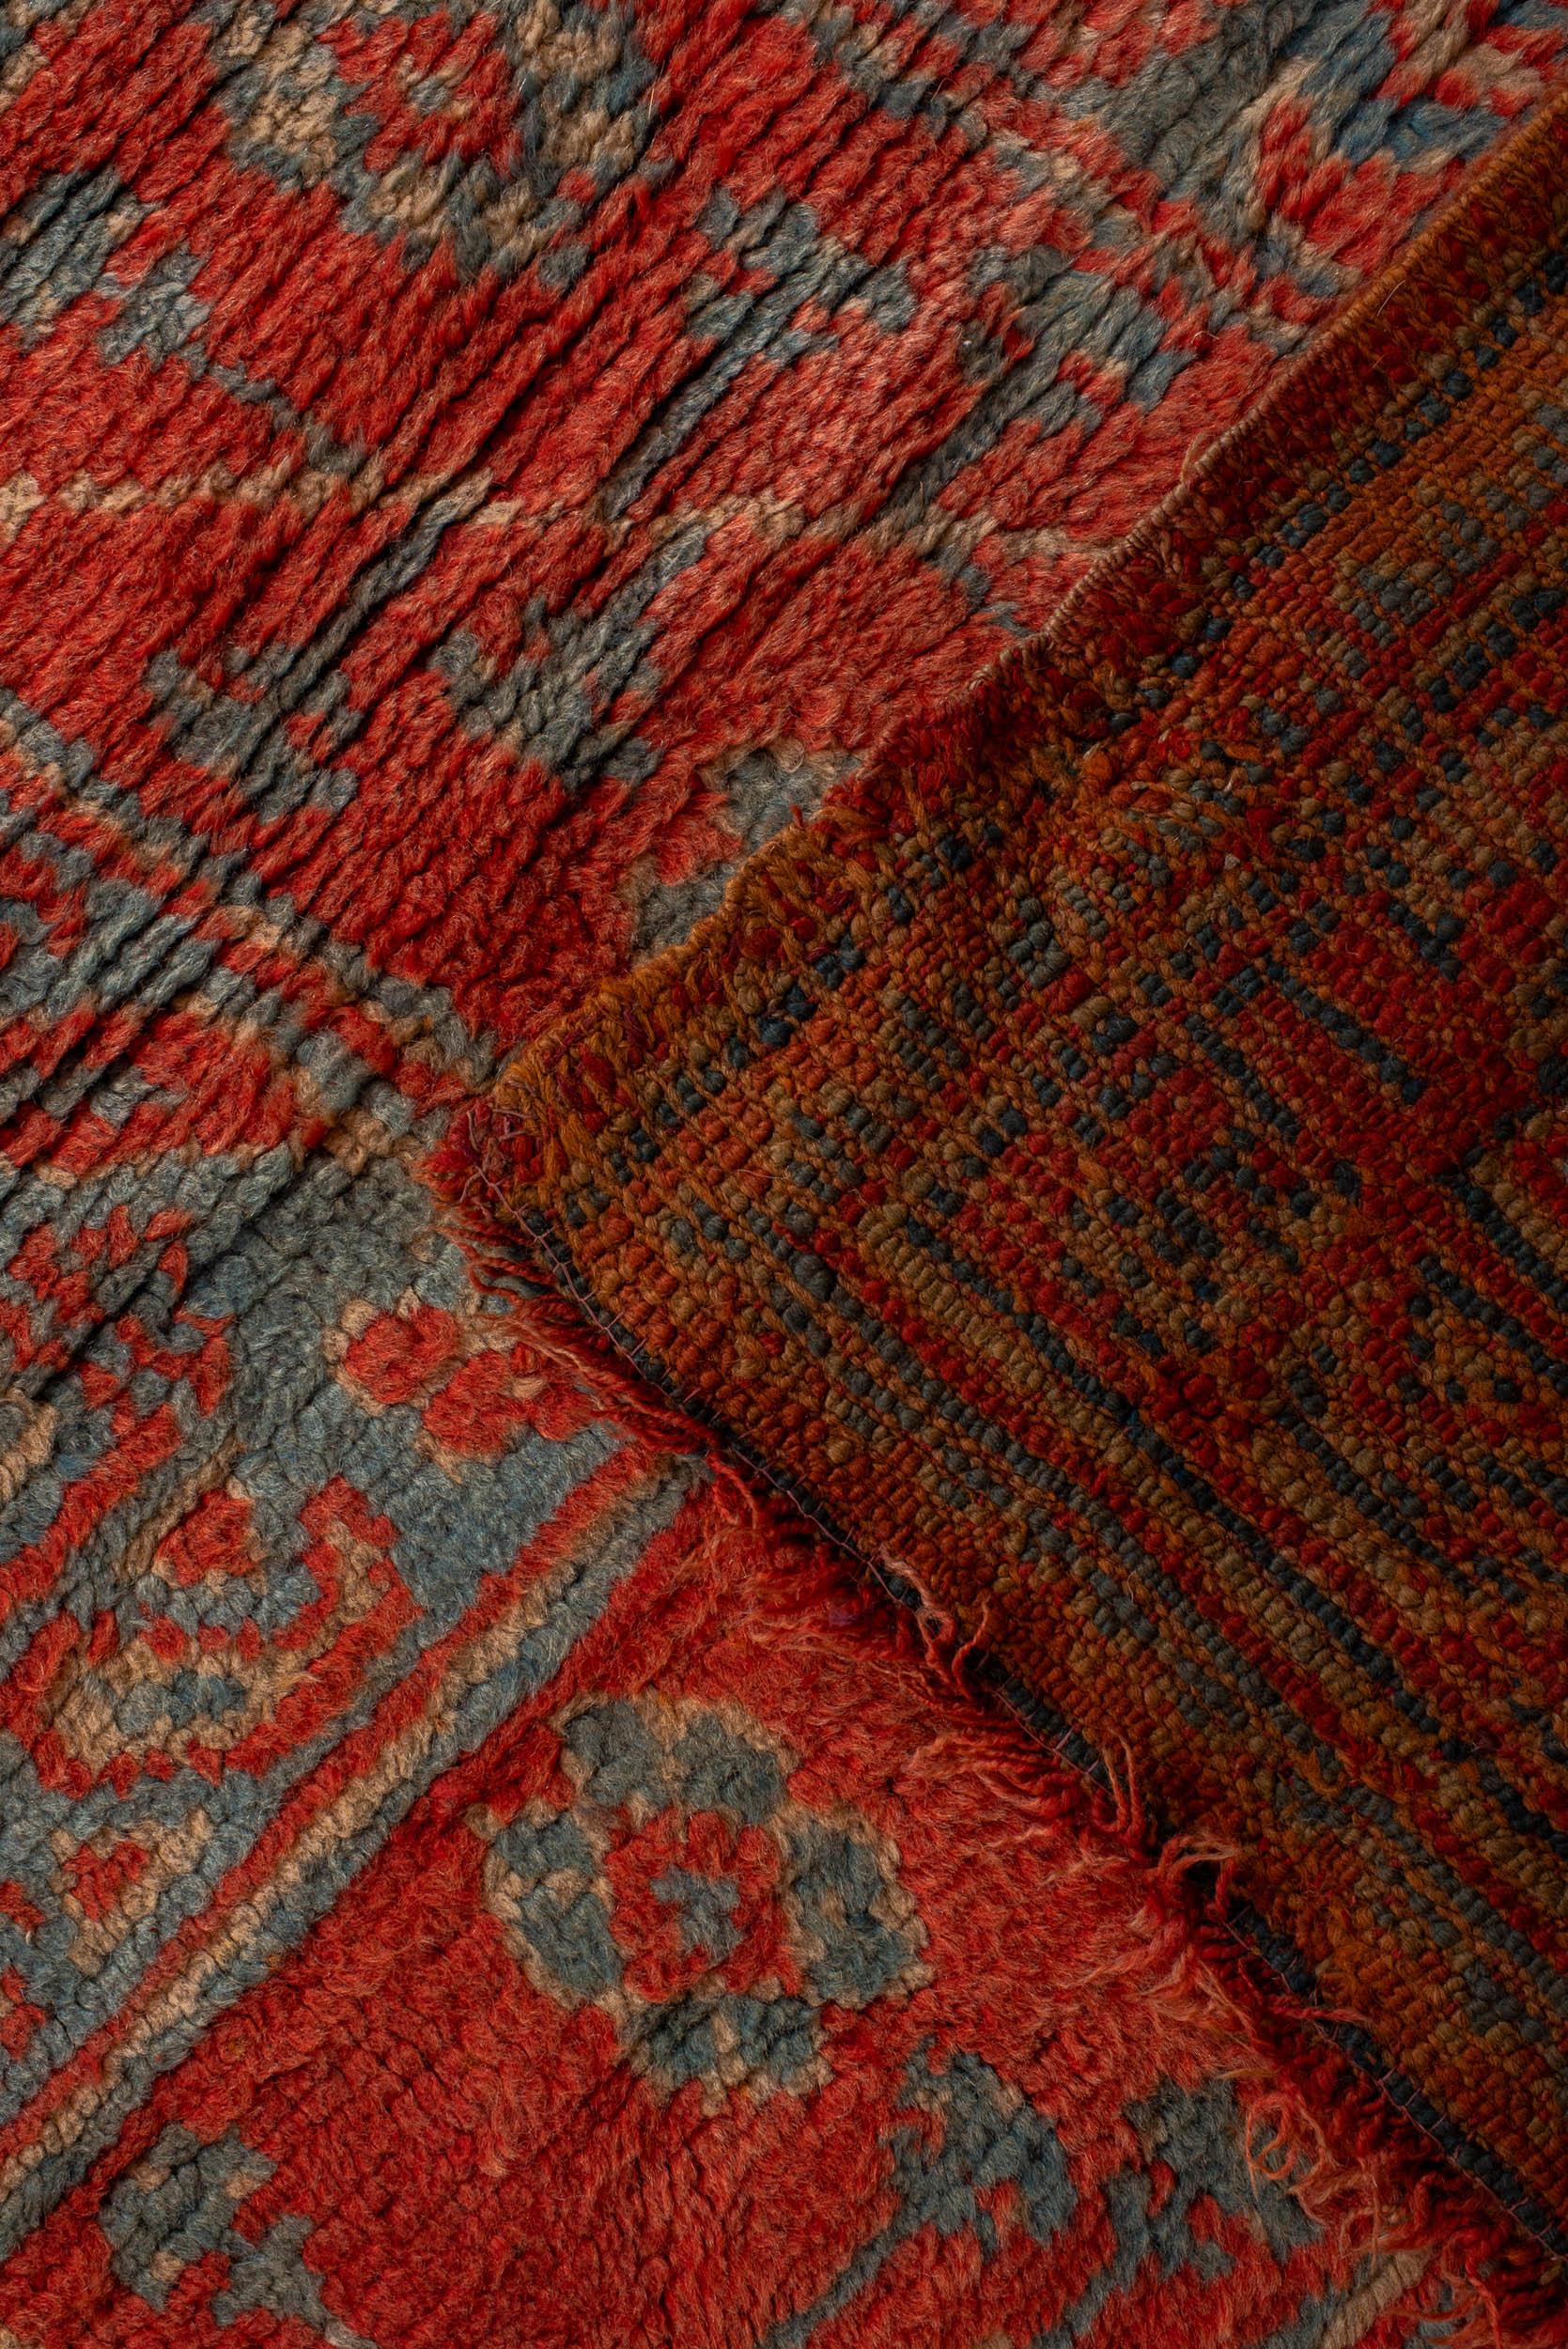 Antique Turkish Oushak Handwoven Luxury Wool Red Rug,  14'4 x 20' Size In Good Condition For Sale In Secaucus, NJ